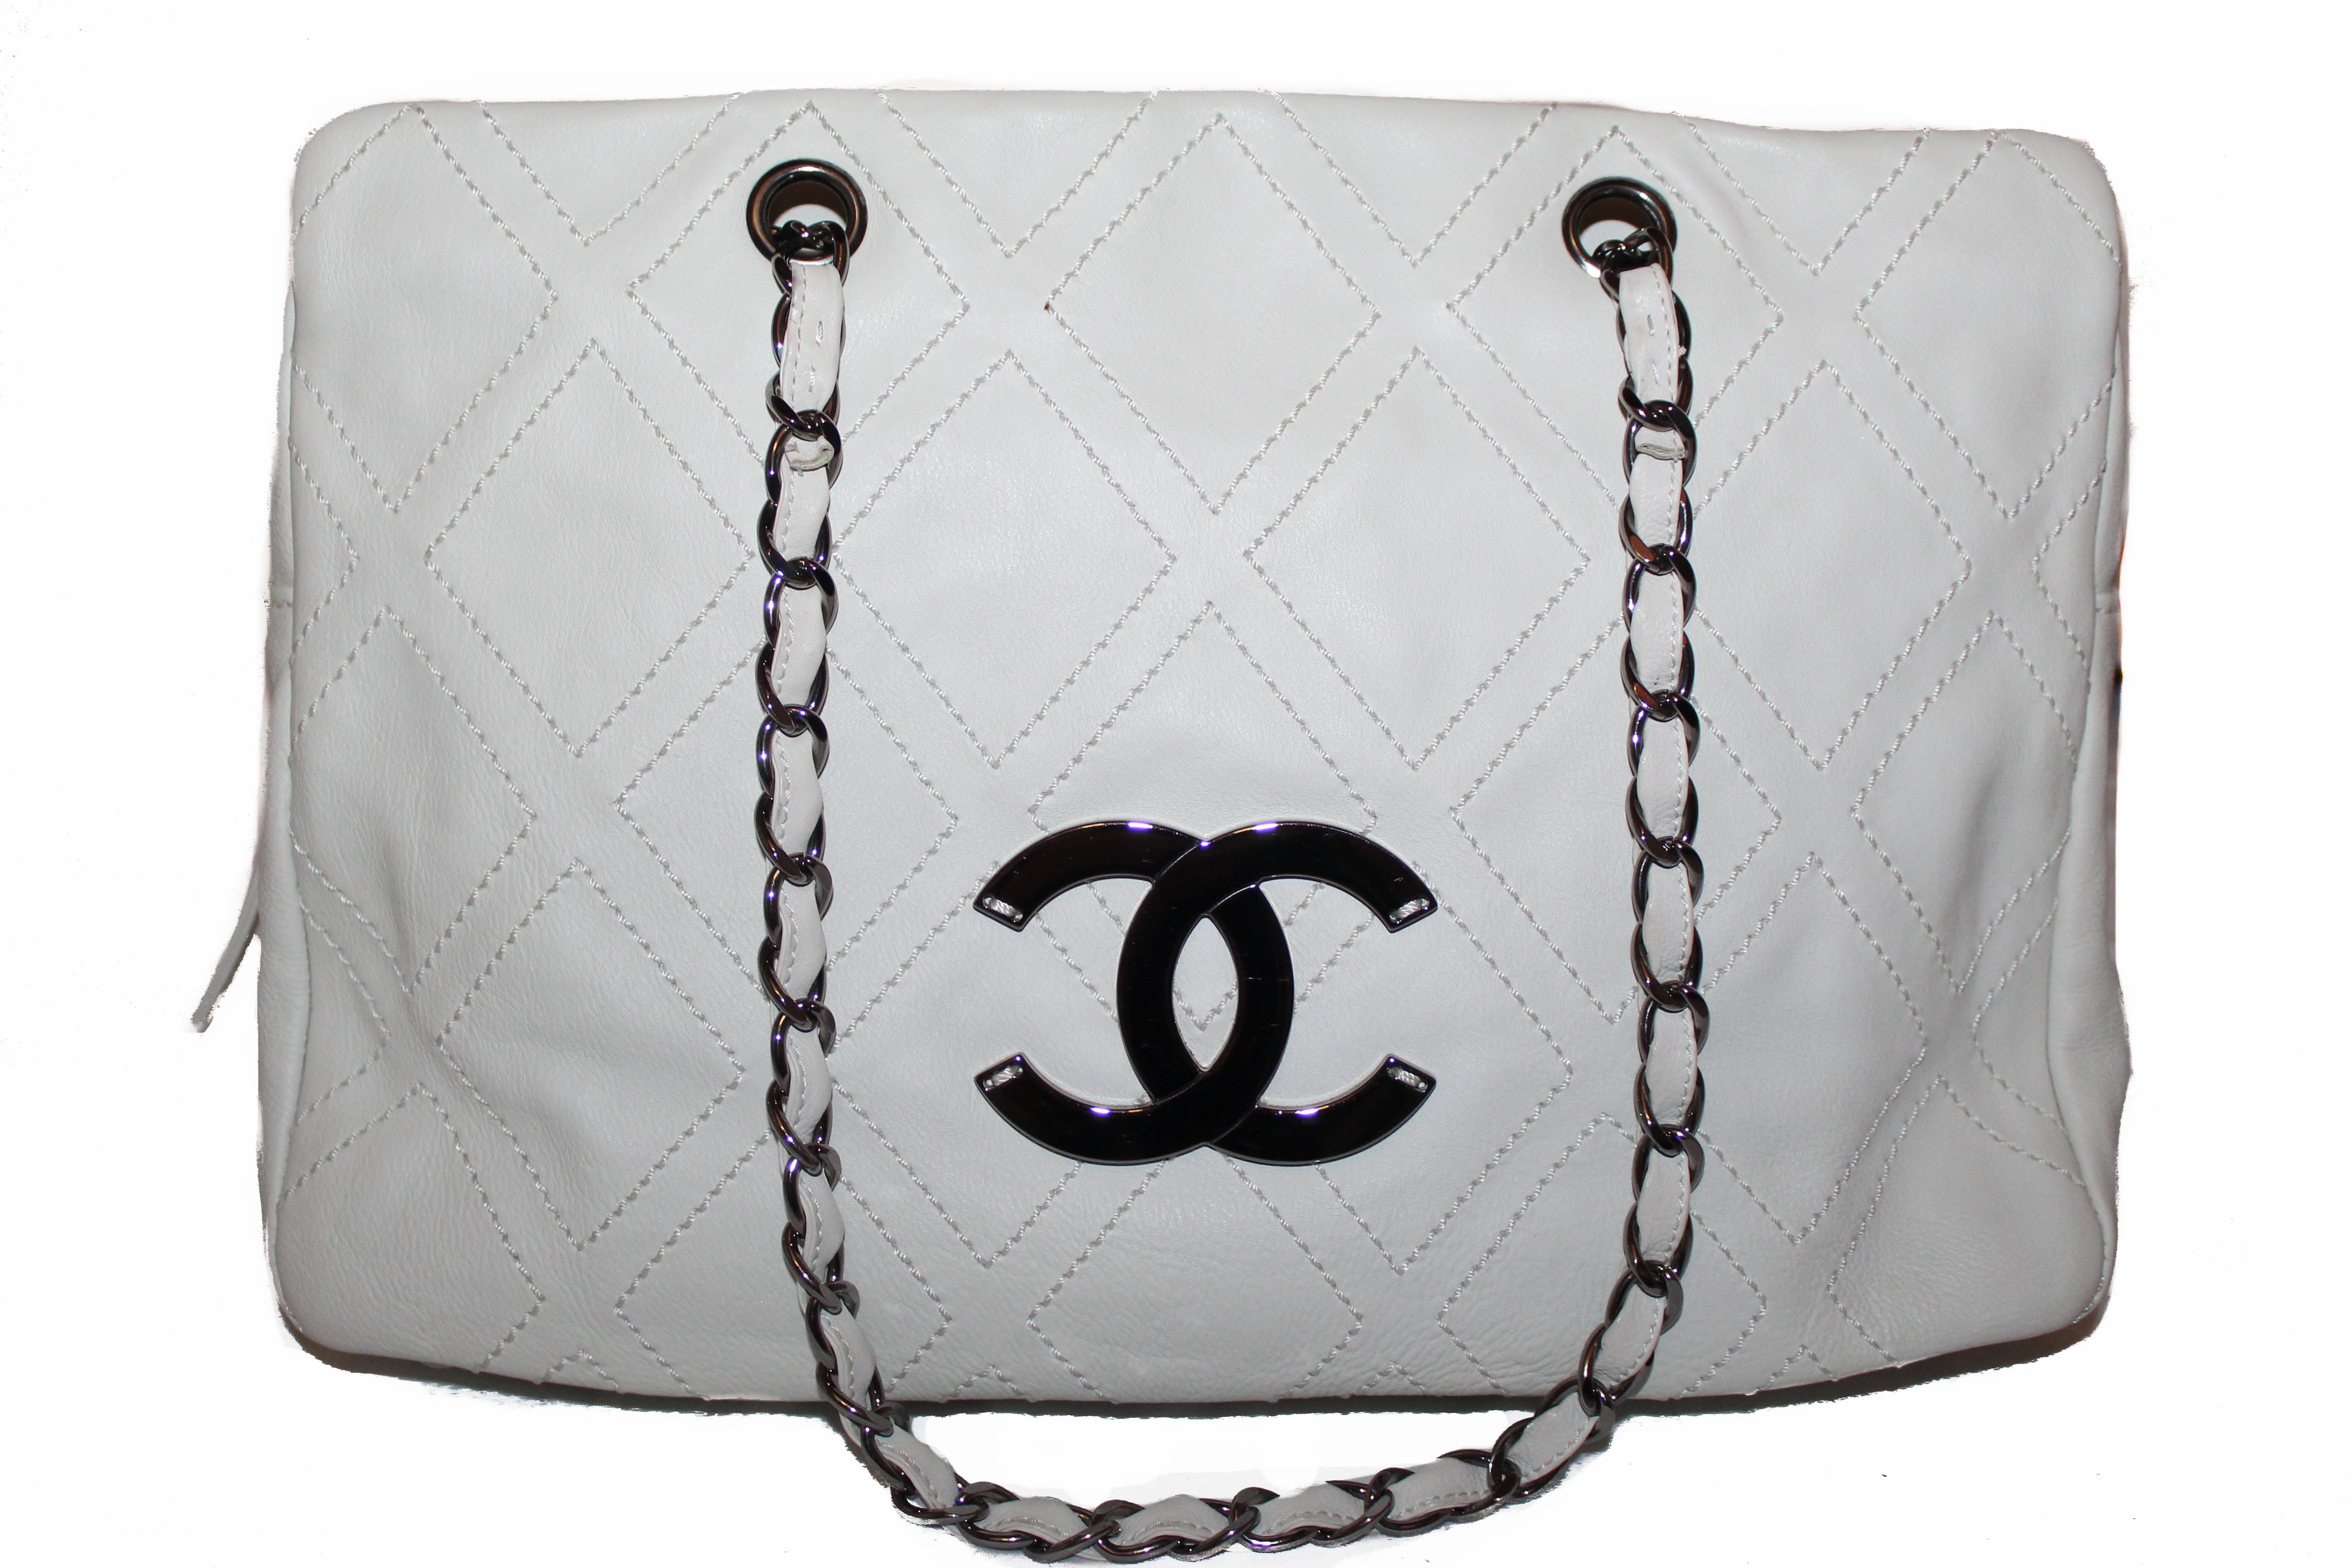 Authentic Chanel Off White Lambskin Leather Diamond Stitch Tote Bag